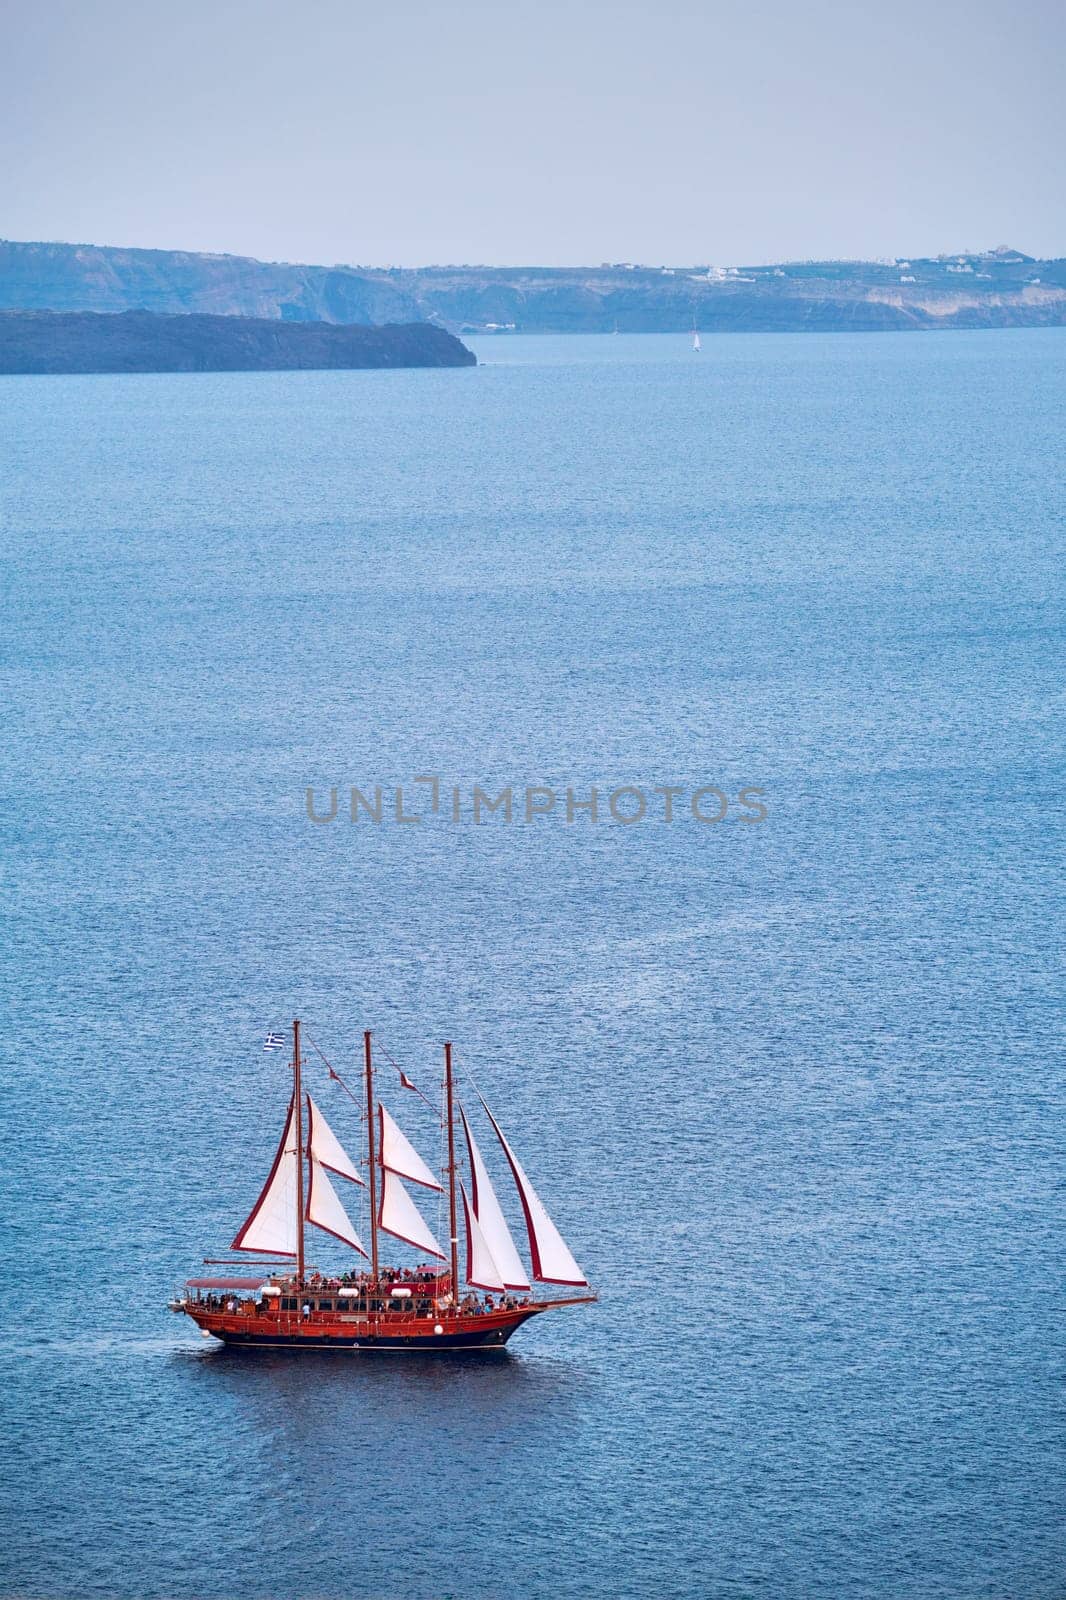 Schooner vessel ship boat in Aegean sea near Santorini island with tourists going to sunset viewpoint by dimol